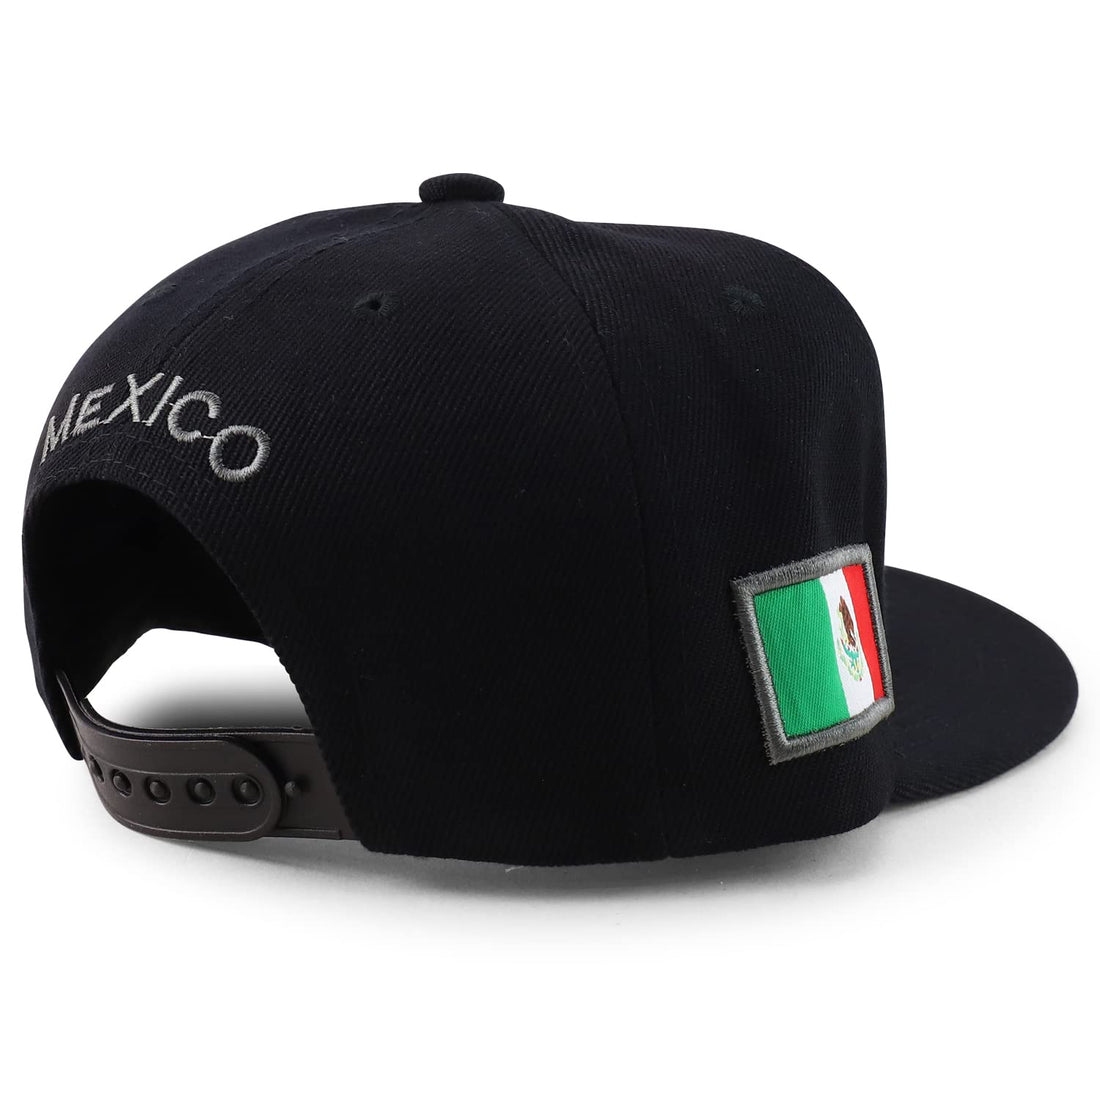 Trendy Apparel Shop Kids Cities of Mexico Circular Logo Embroidered Structured Snapback Cap